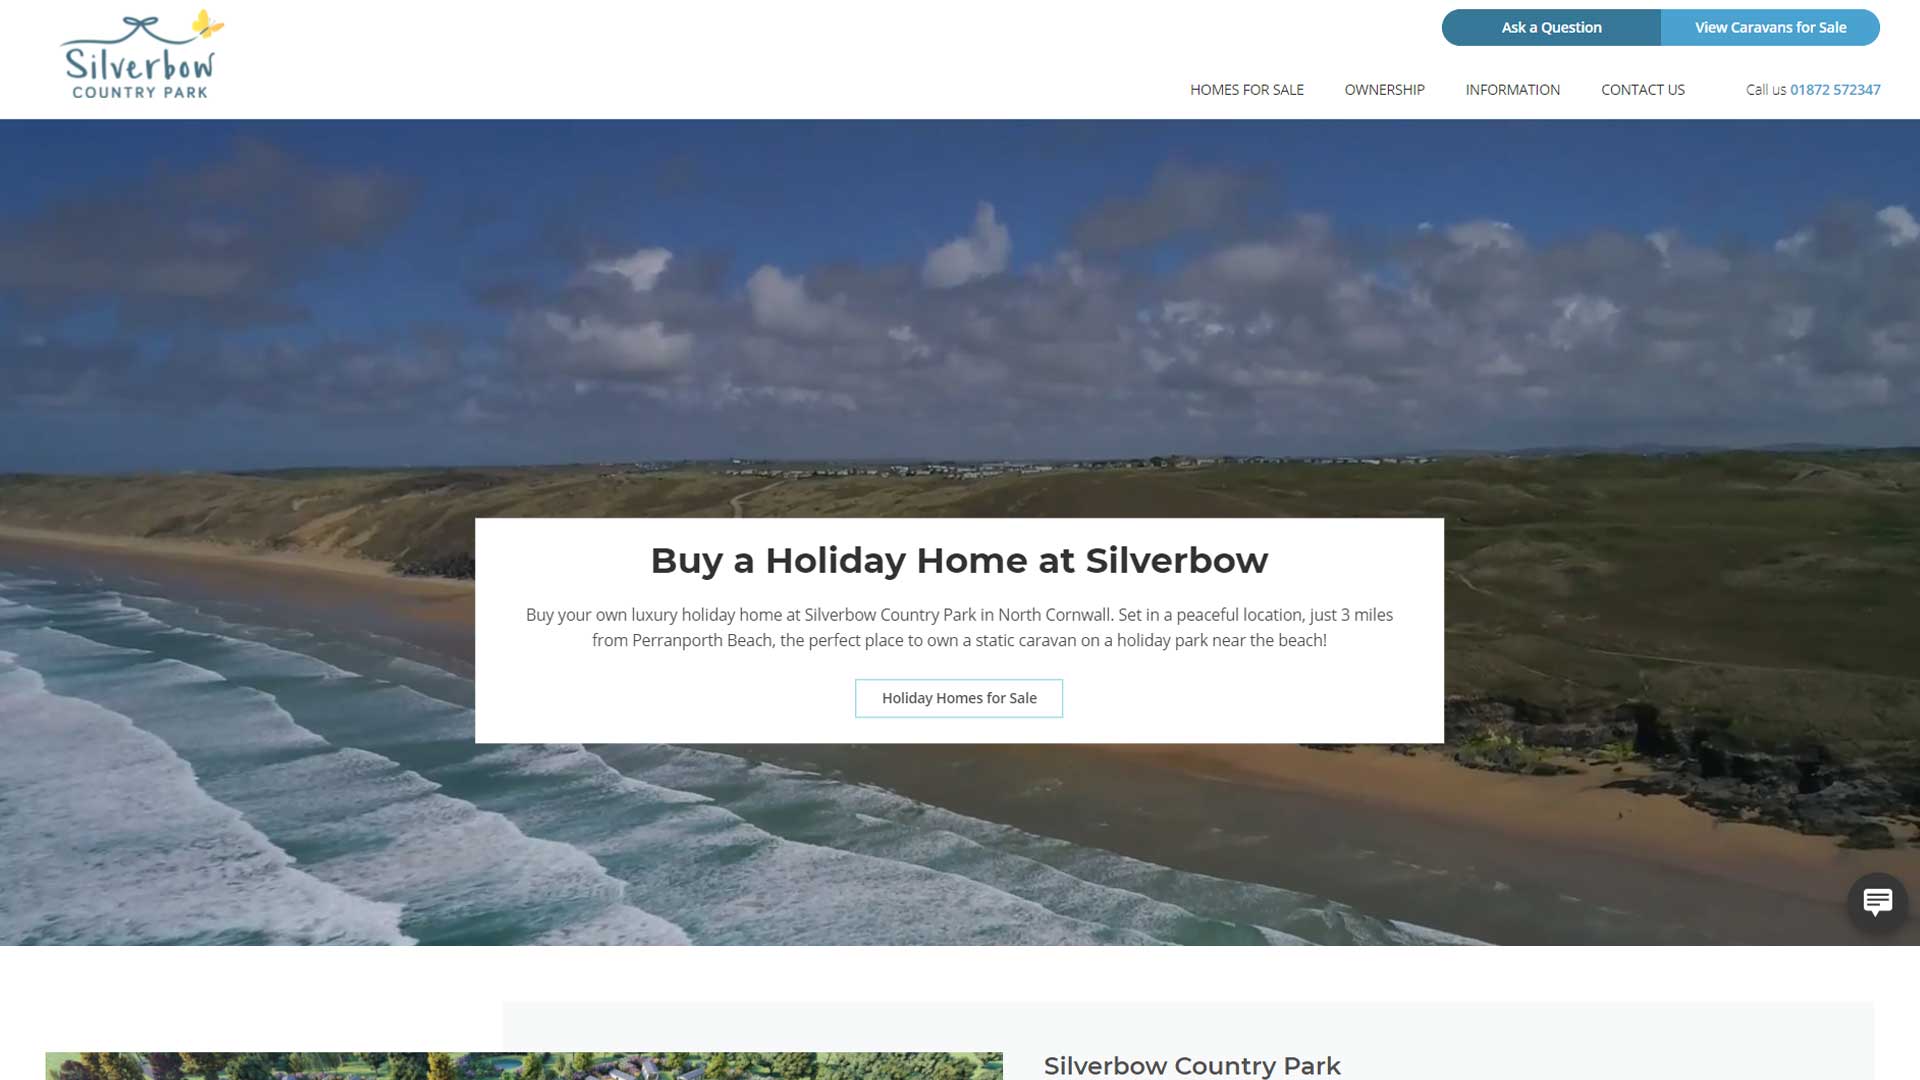 Silverbow home page as displayed on a p.c